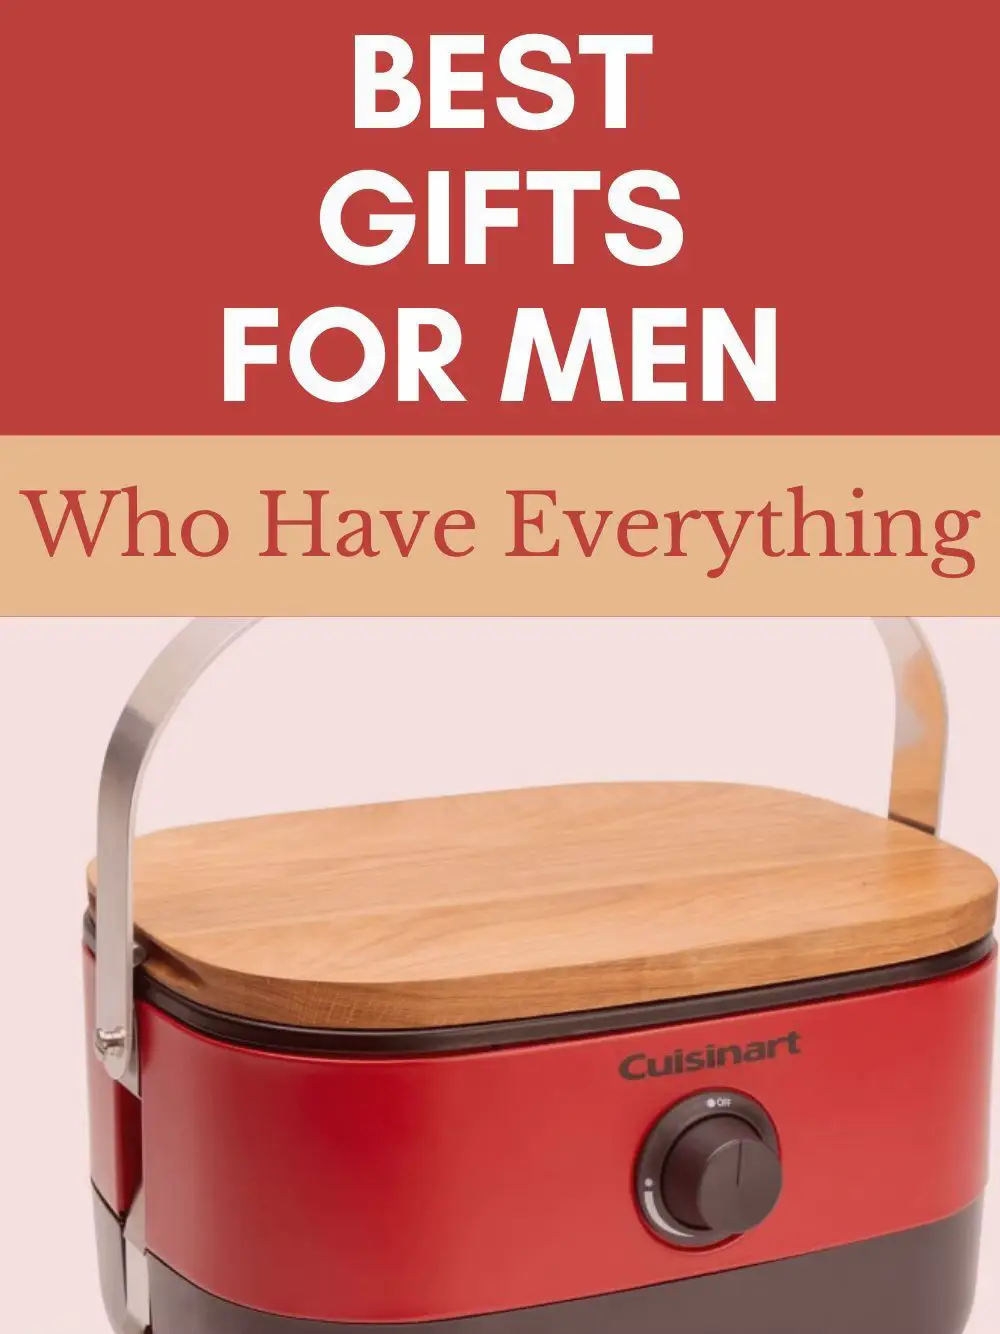 Unique gifts for people who have everything